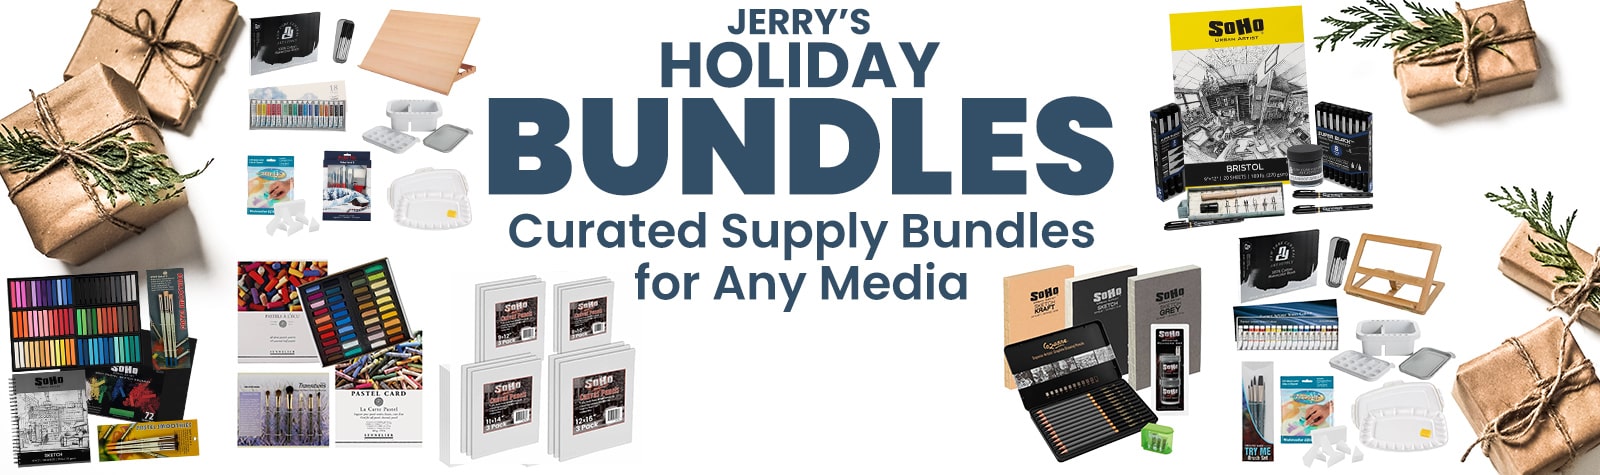 Jerry's Holiday Special Bundles